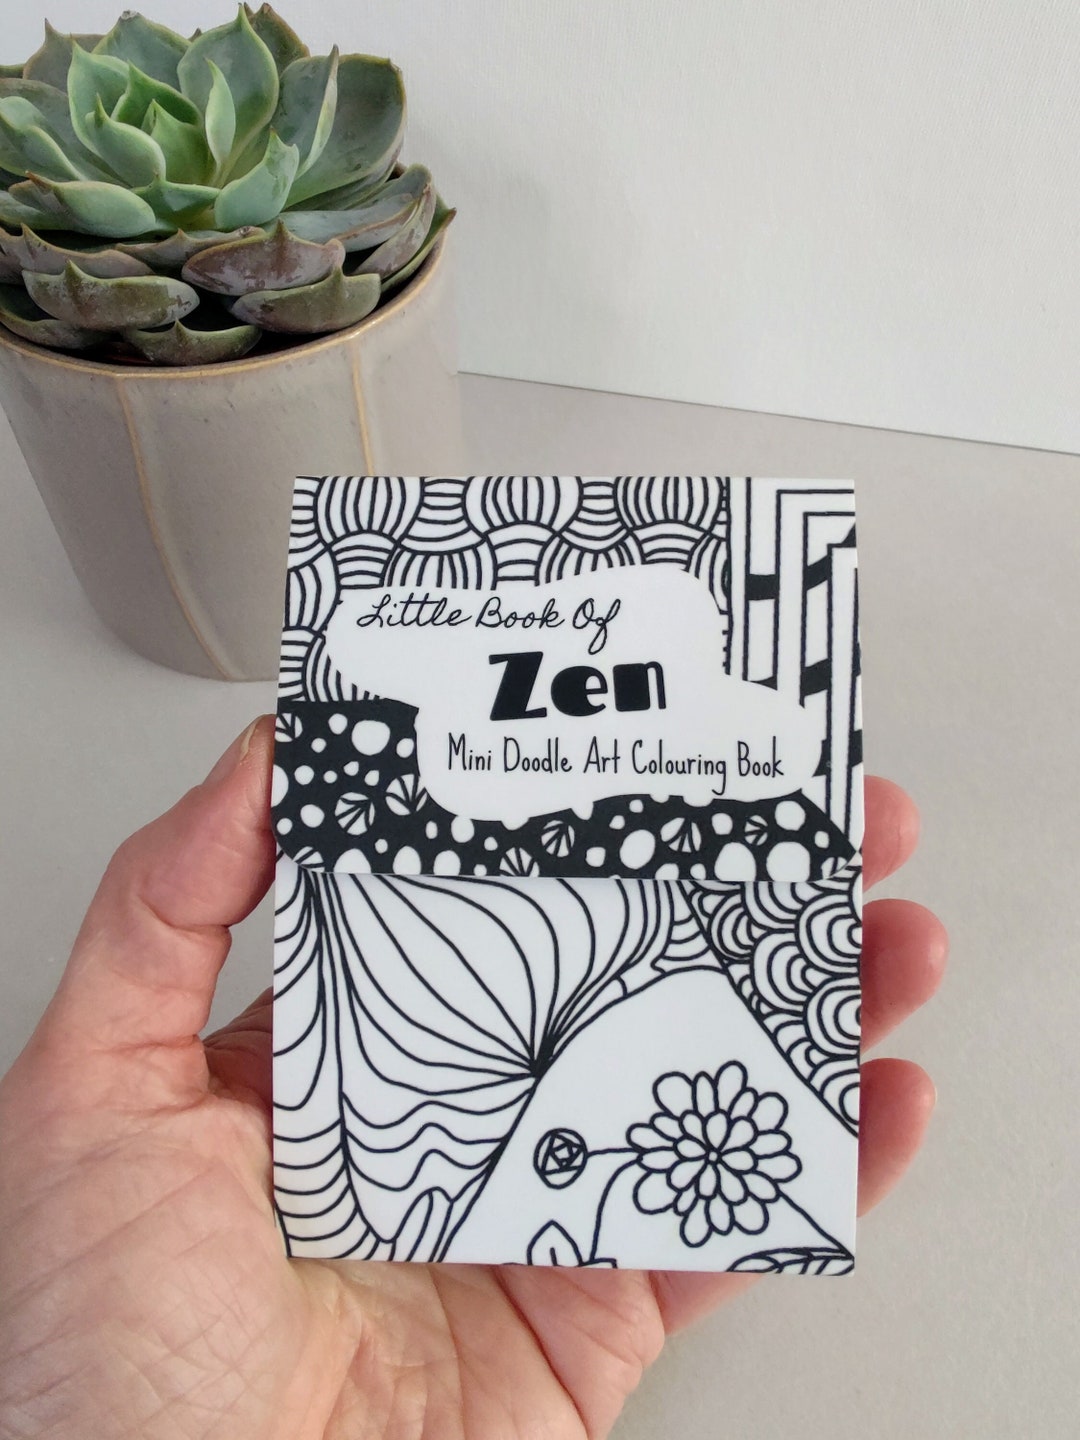 Little Book of Zen Mini Doodle Art Colouring Book for Adults. A7 Sheets  With Magnetic Closure Cover. -  Israel